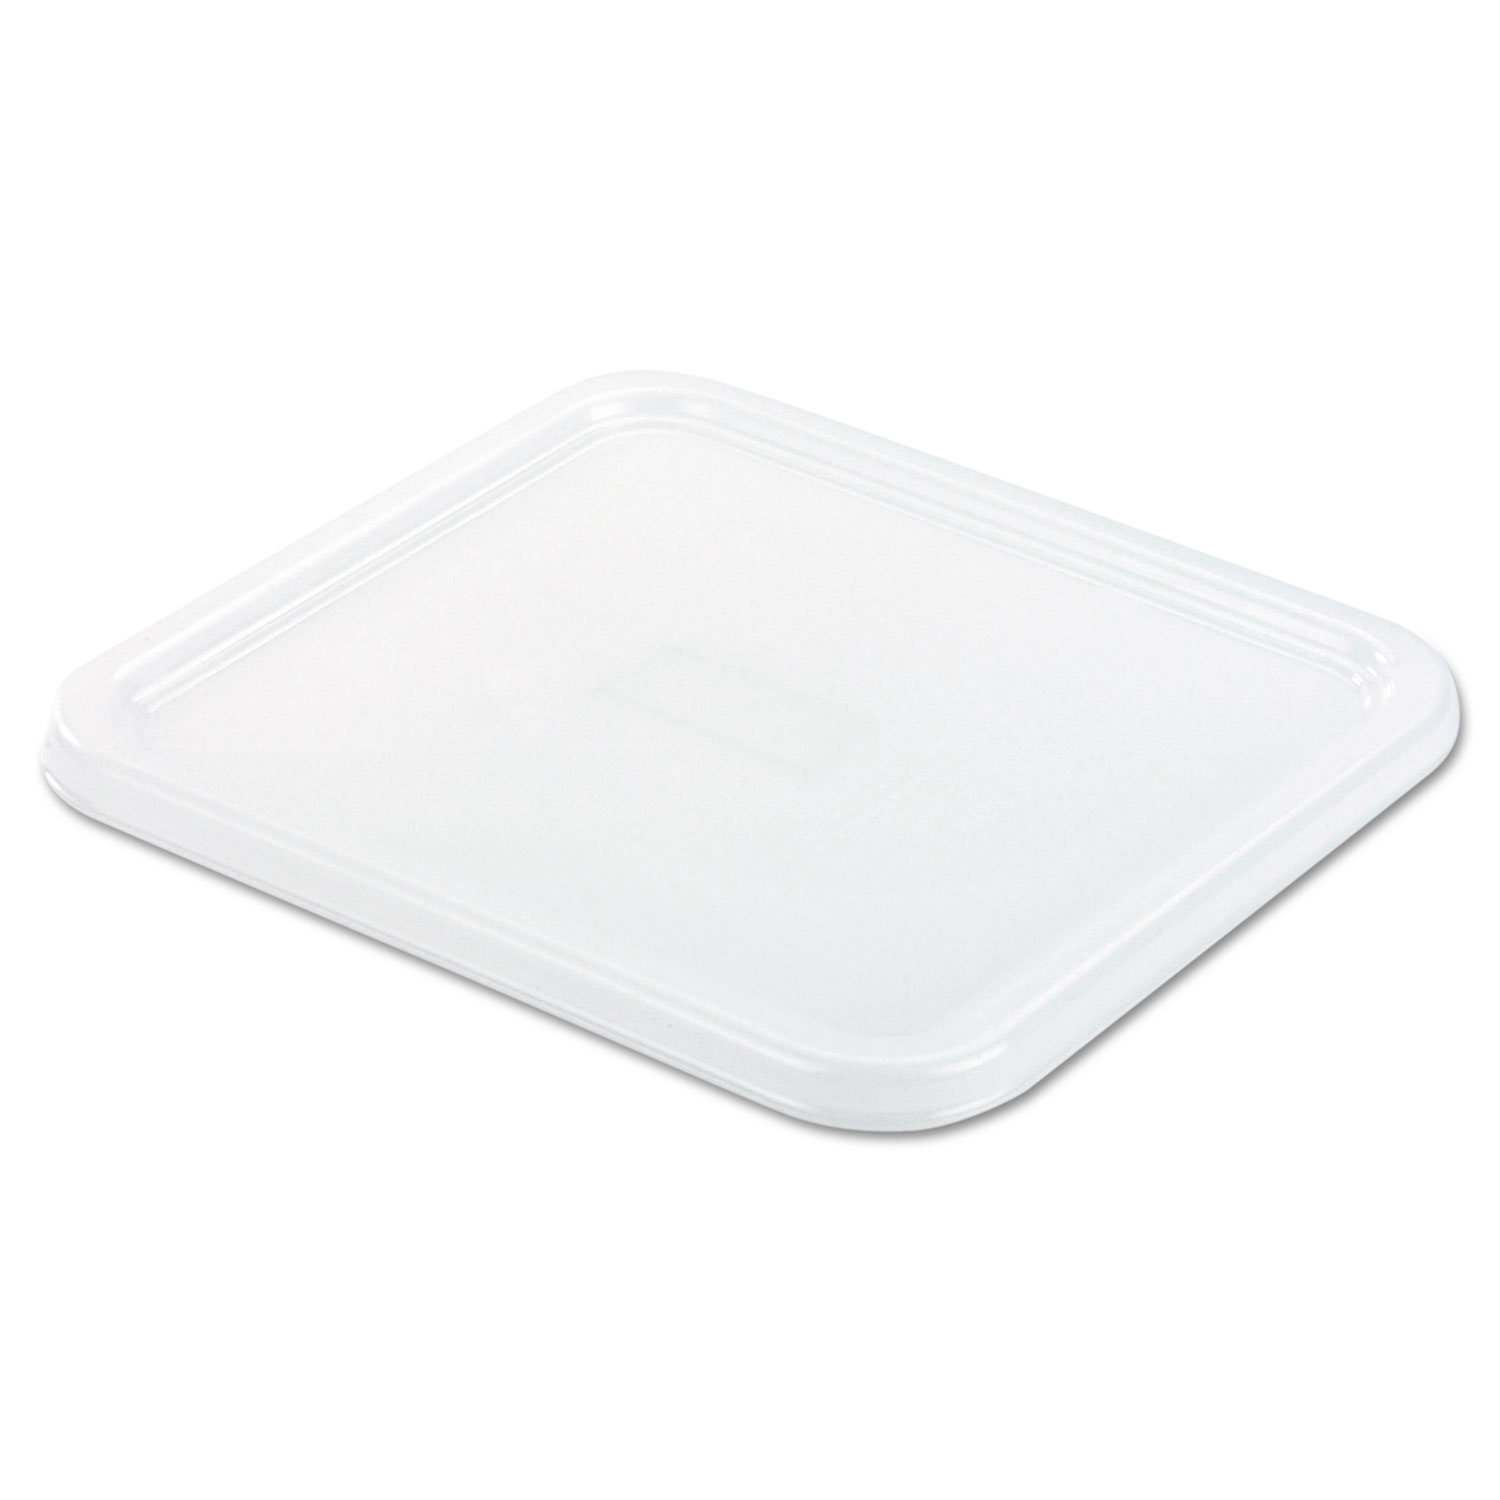 SpaceSaver Square Container Lids, 8 4/5w x 8 3/4d, White